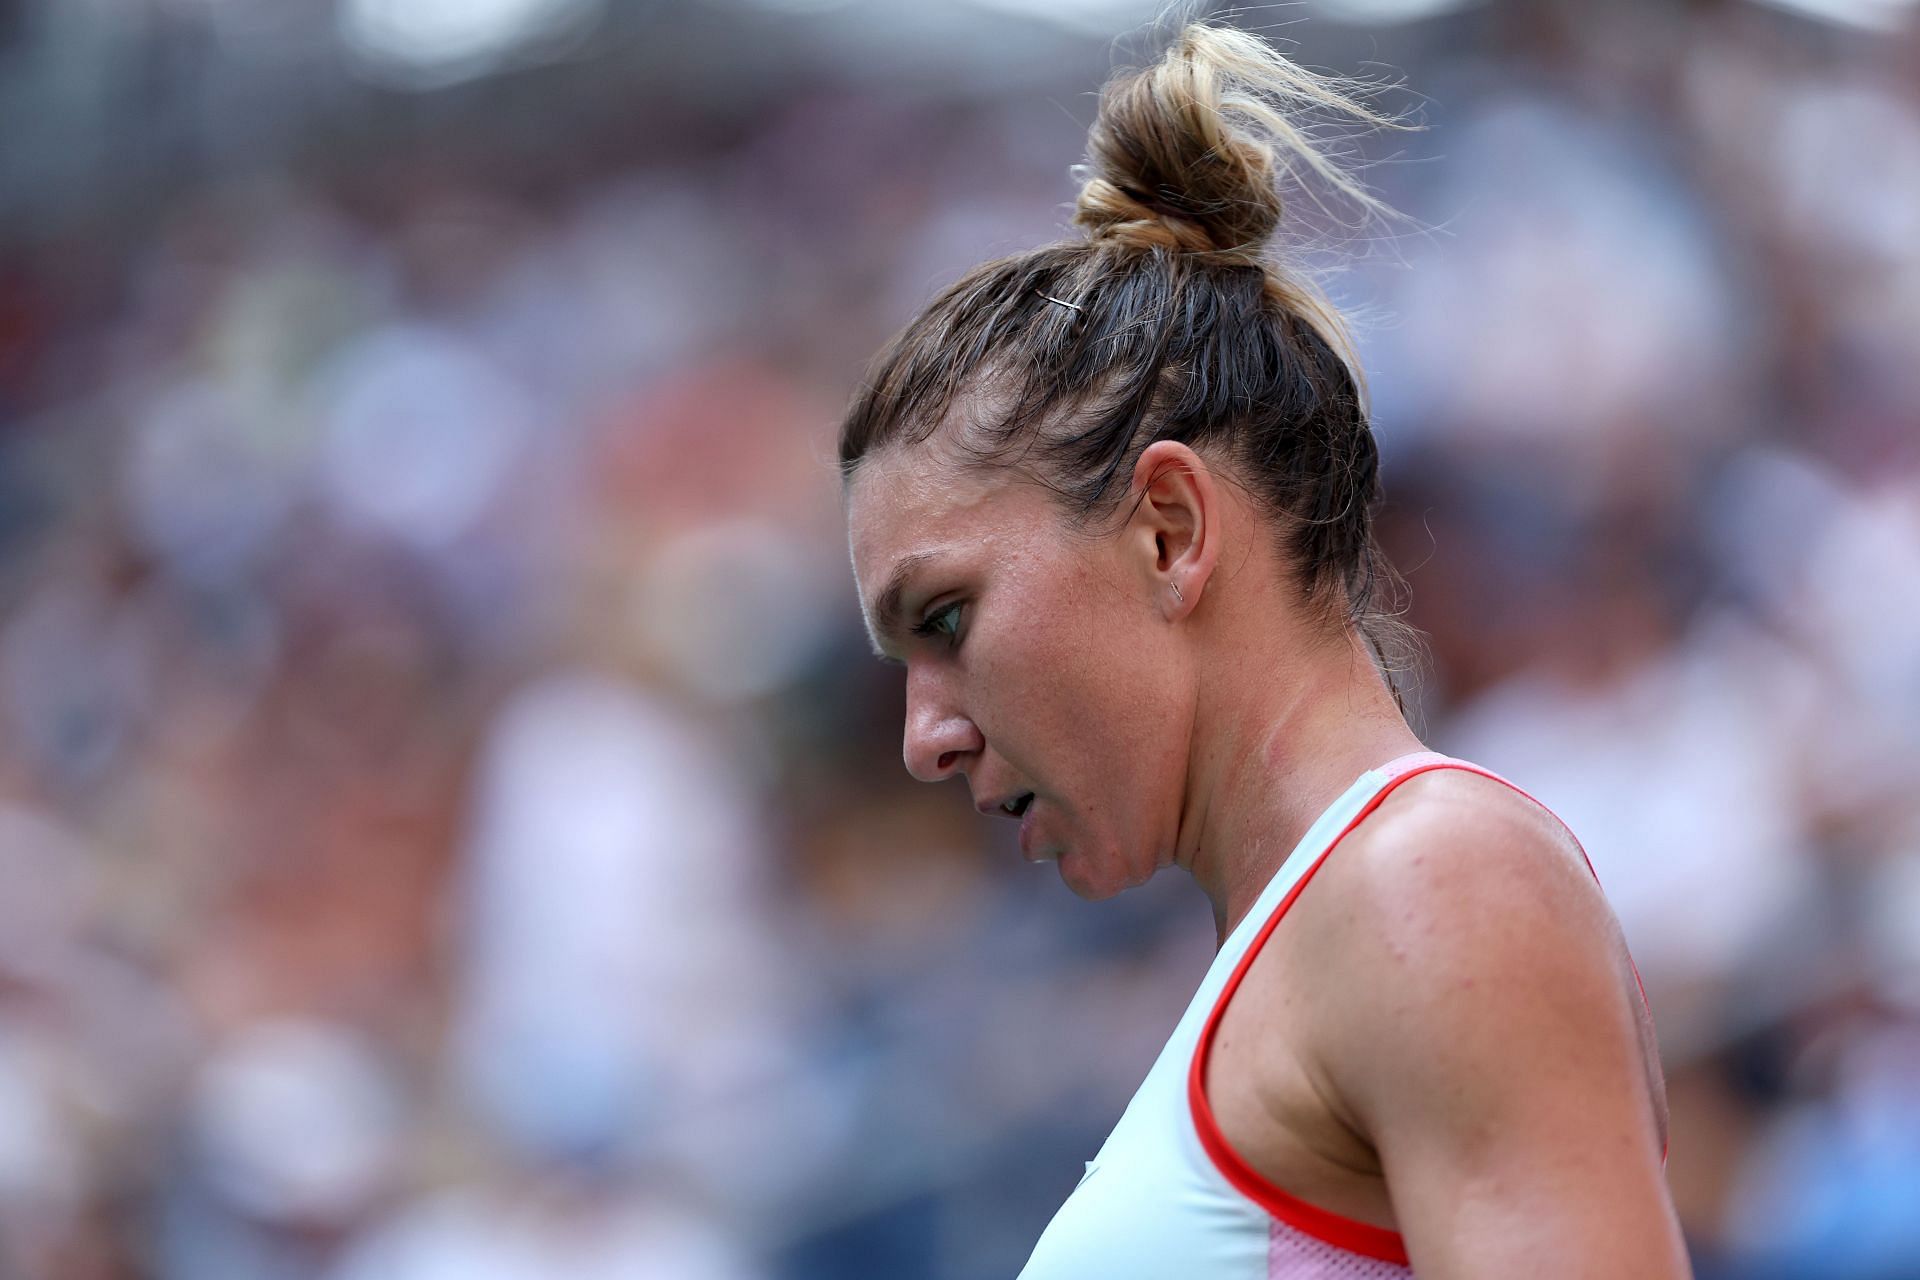 Simona Halep charged with a second doping violation.